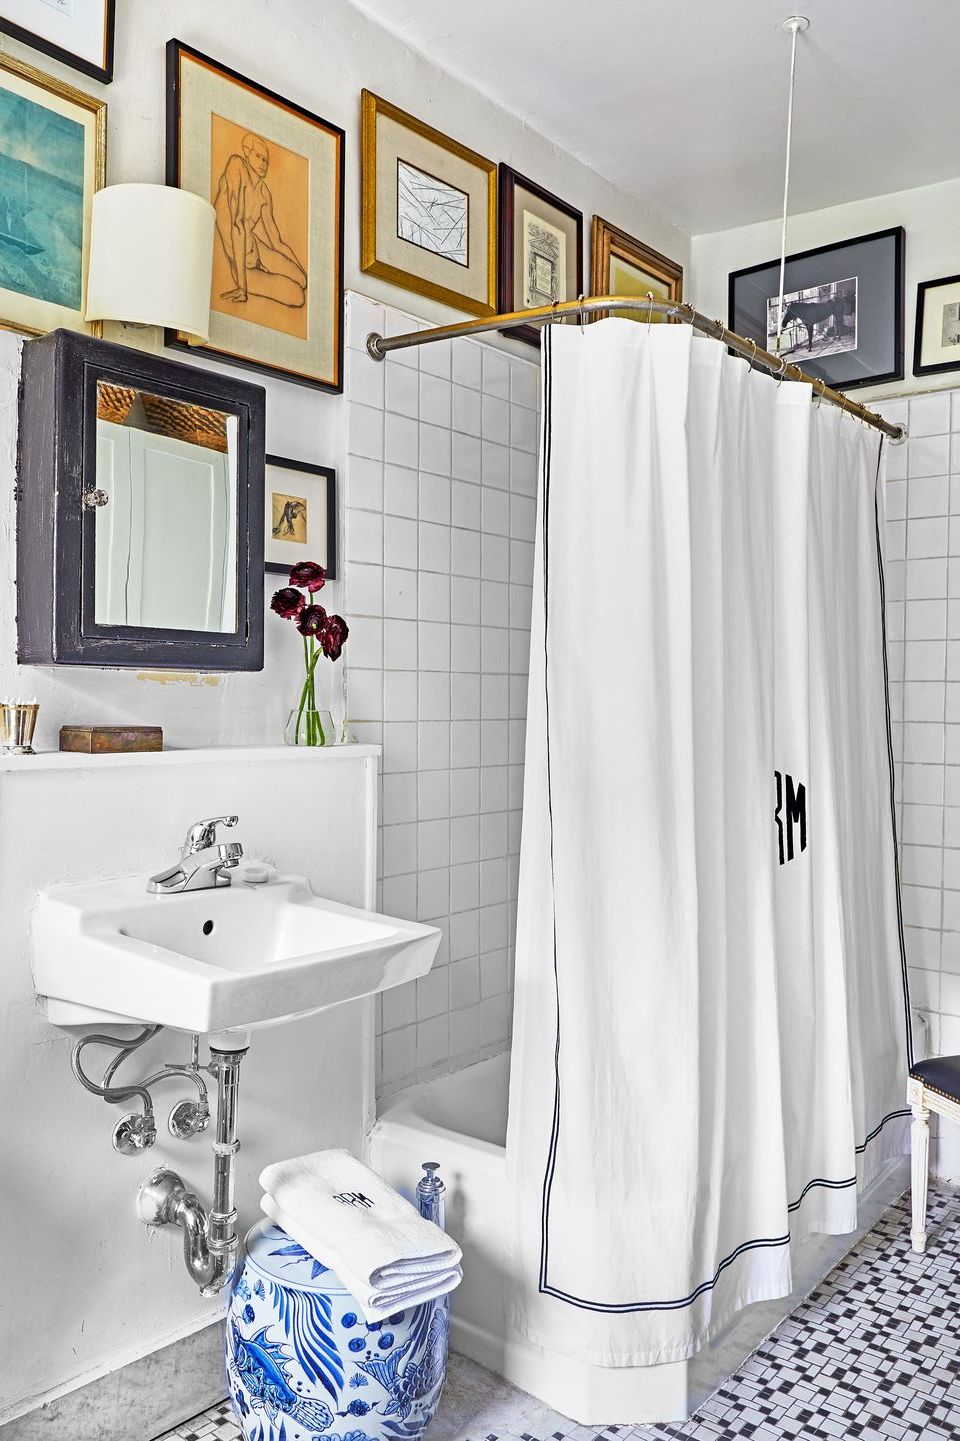 19 Affordable Decorating Ideas to Bring Spa Style to Your Small Bathroom